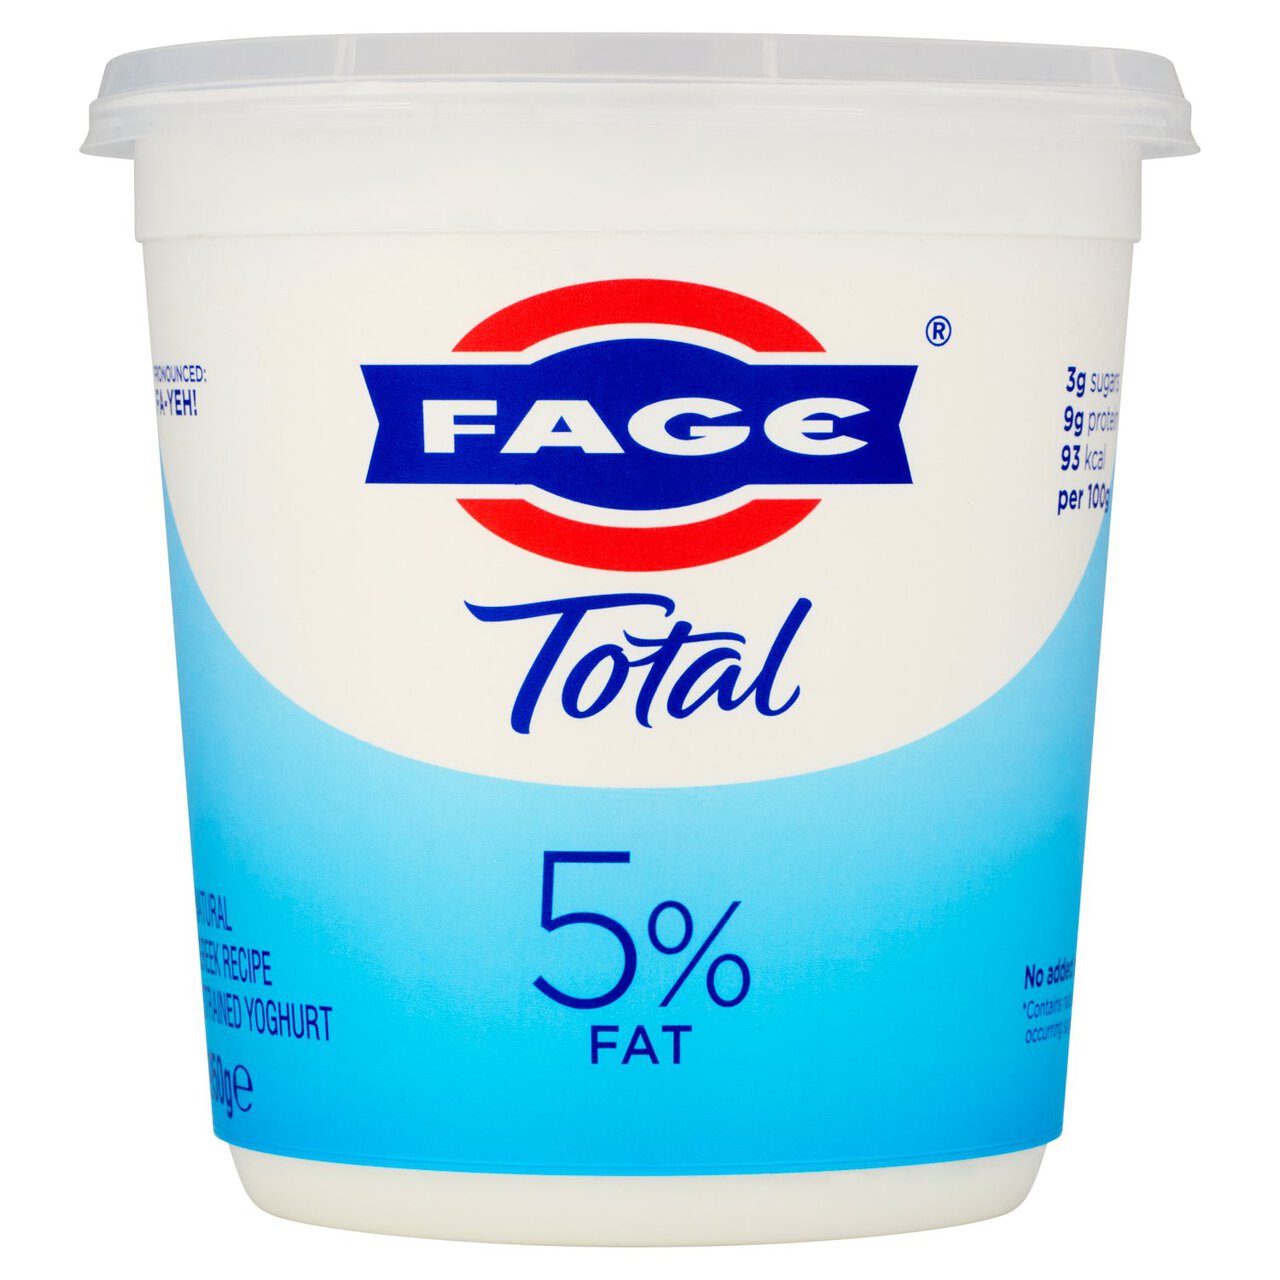 Fage Total 5% Fat Natural Greek Recipe Strained Yoghurt 950g